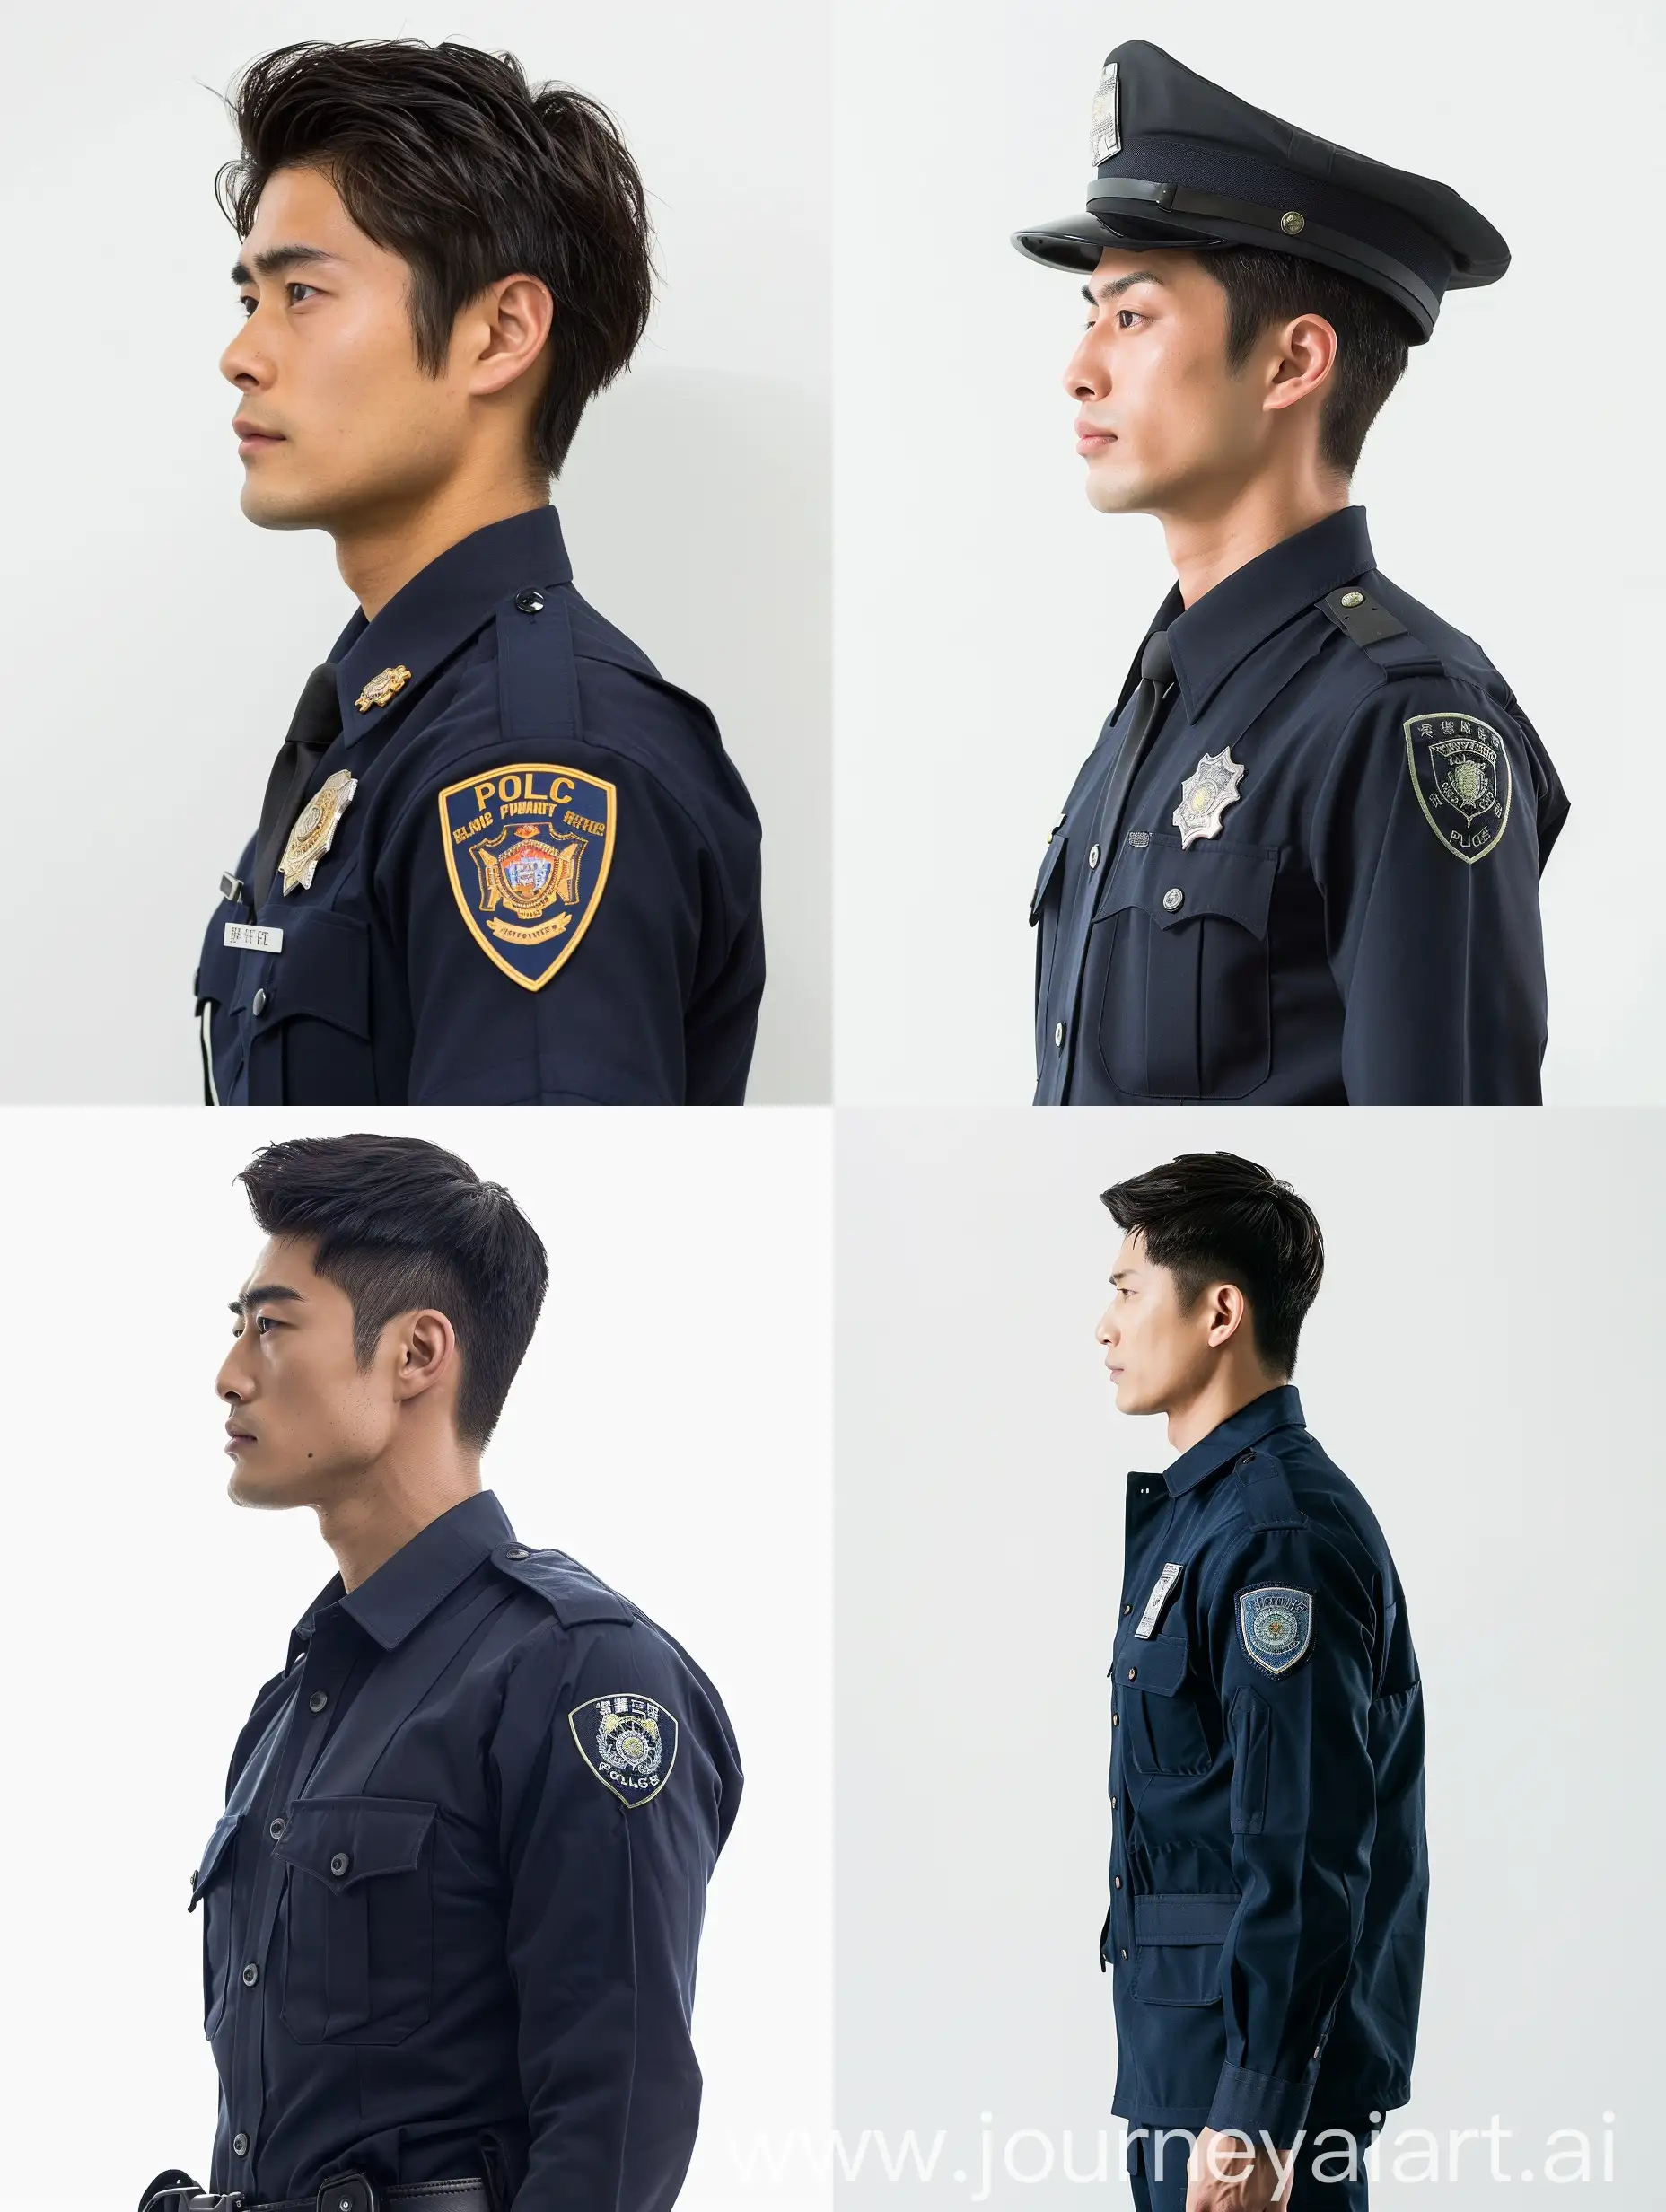 Asian man in police uniform, side view, white background, upper body